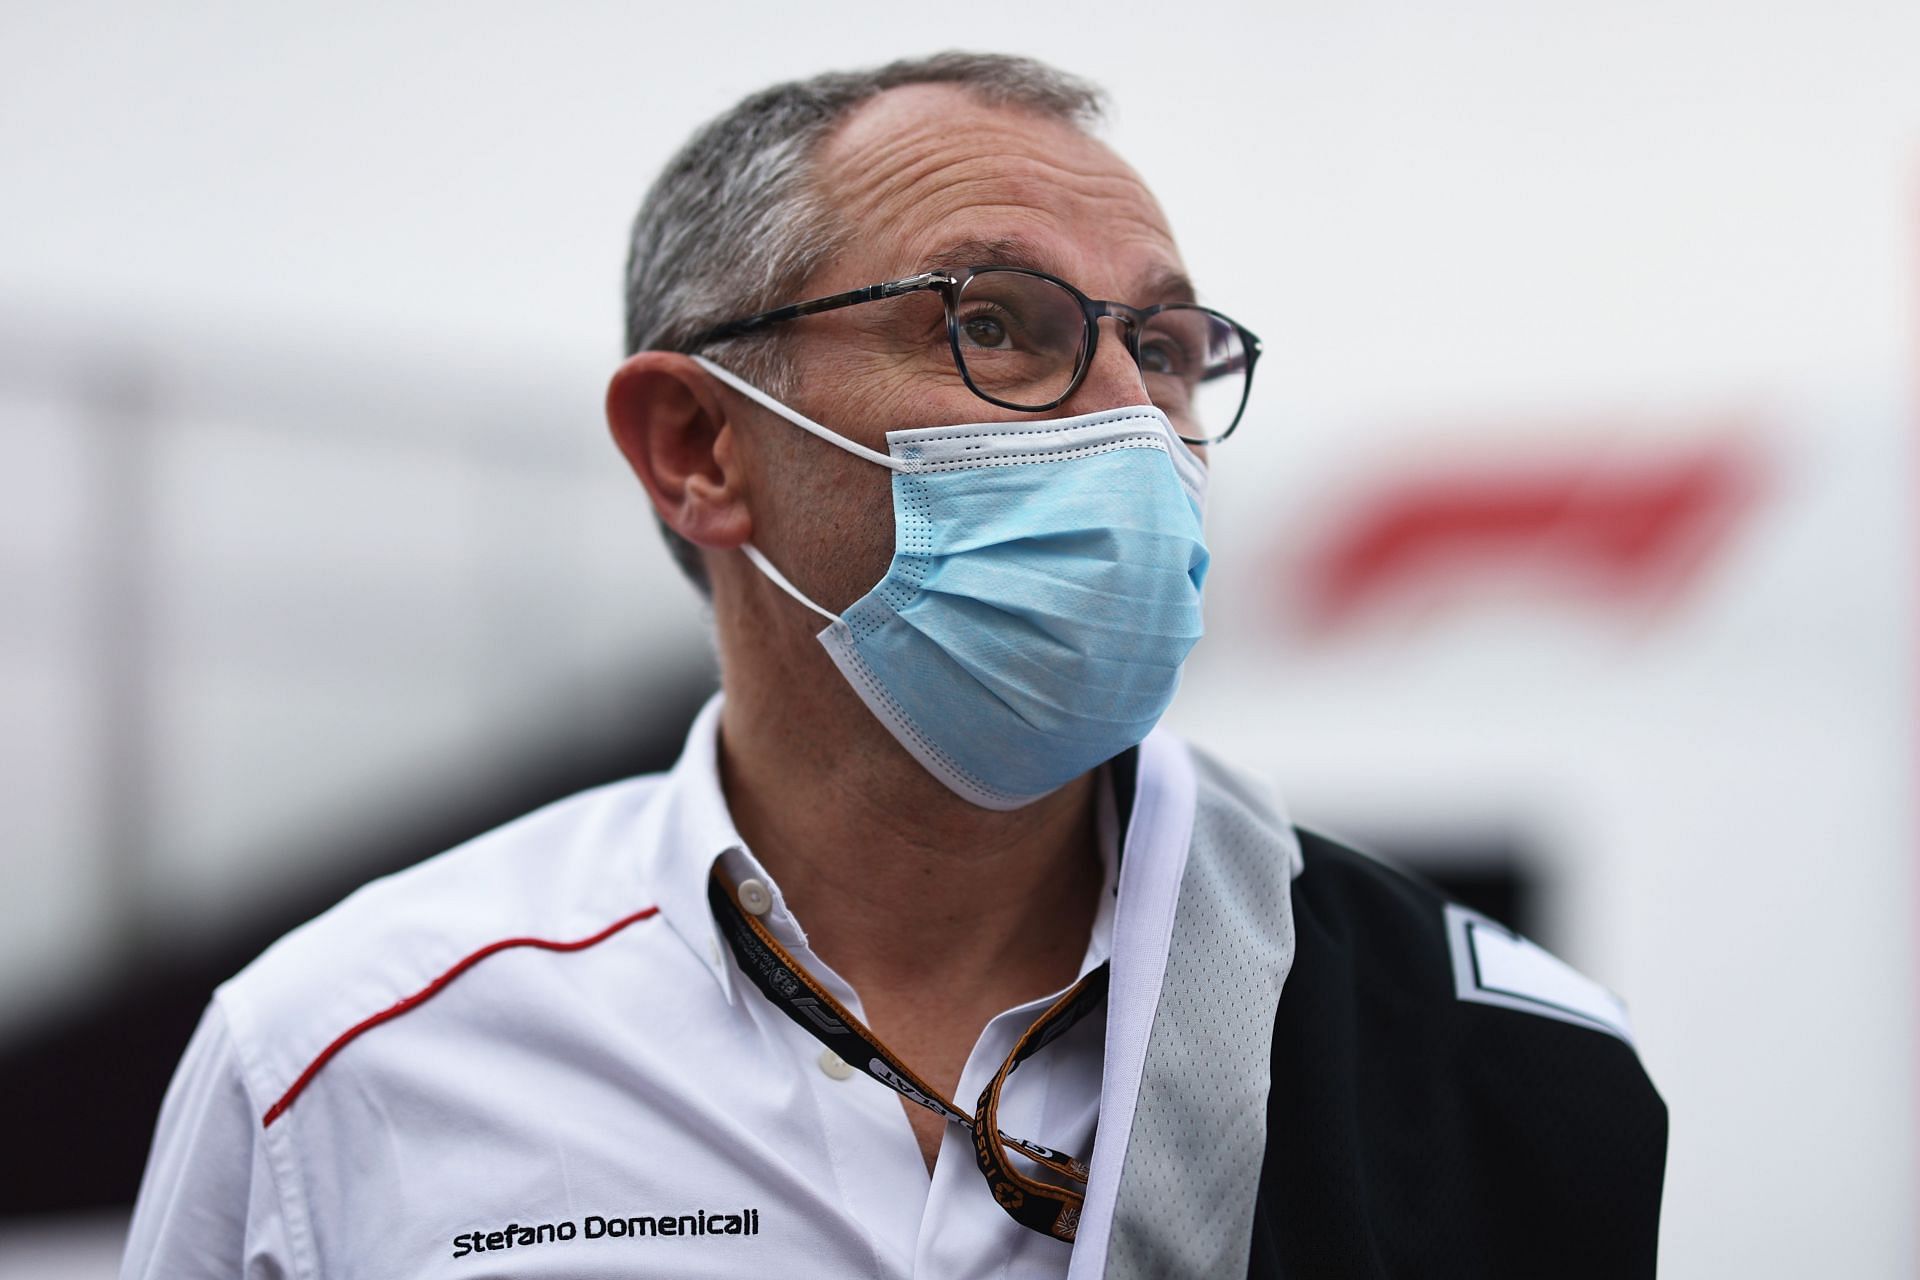 Stefano Domenicali was delighted to announce the extension of the Chinese GP contract (Photo by Chris Graythen/Getty Images)